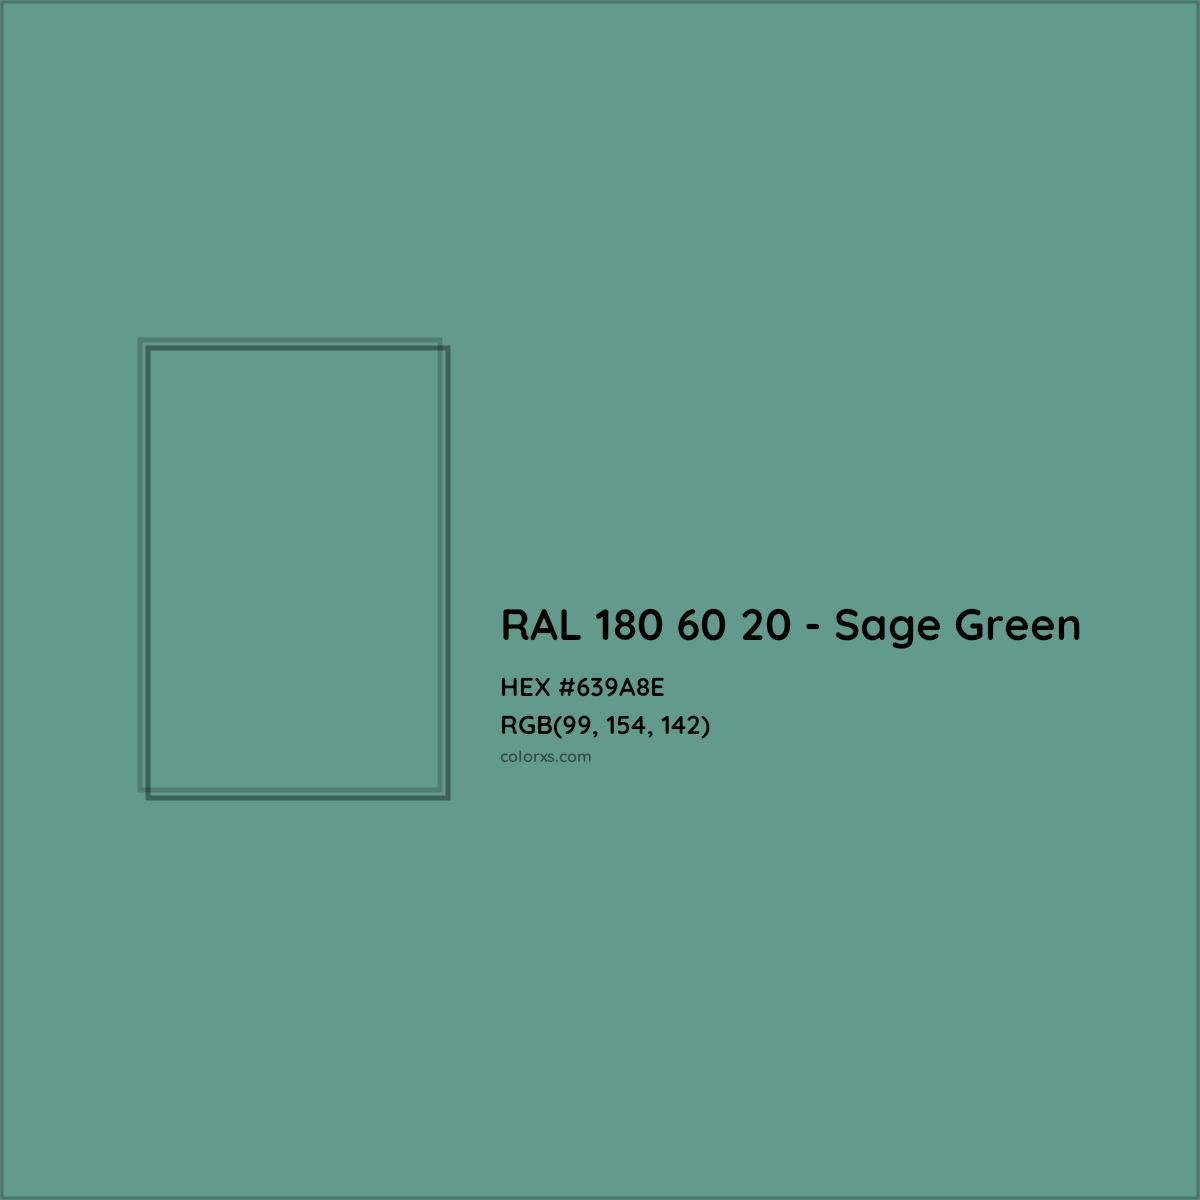 HEX #639A8E RAL 180 60 20 - Sage Green CMS RAL Design - Color Code